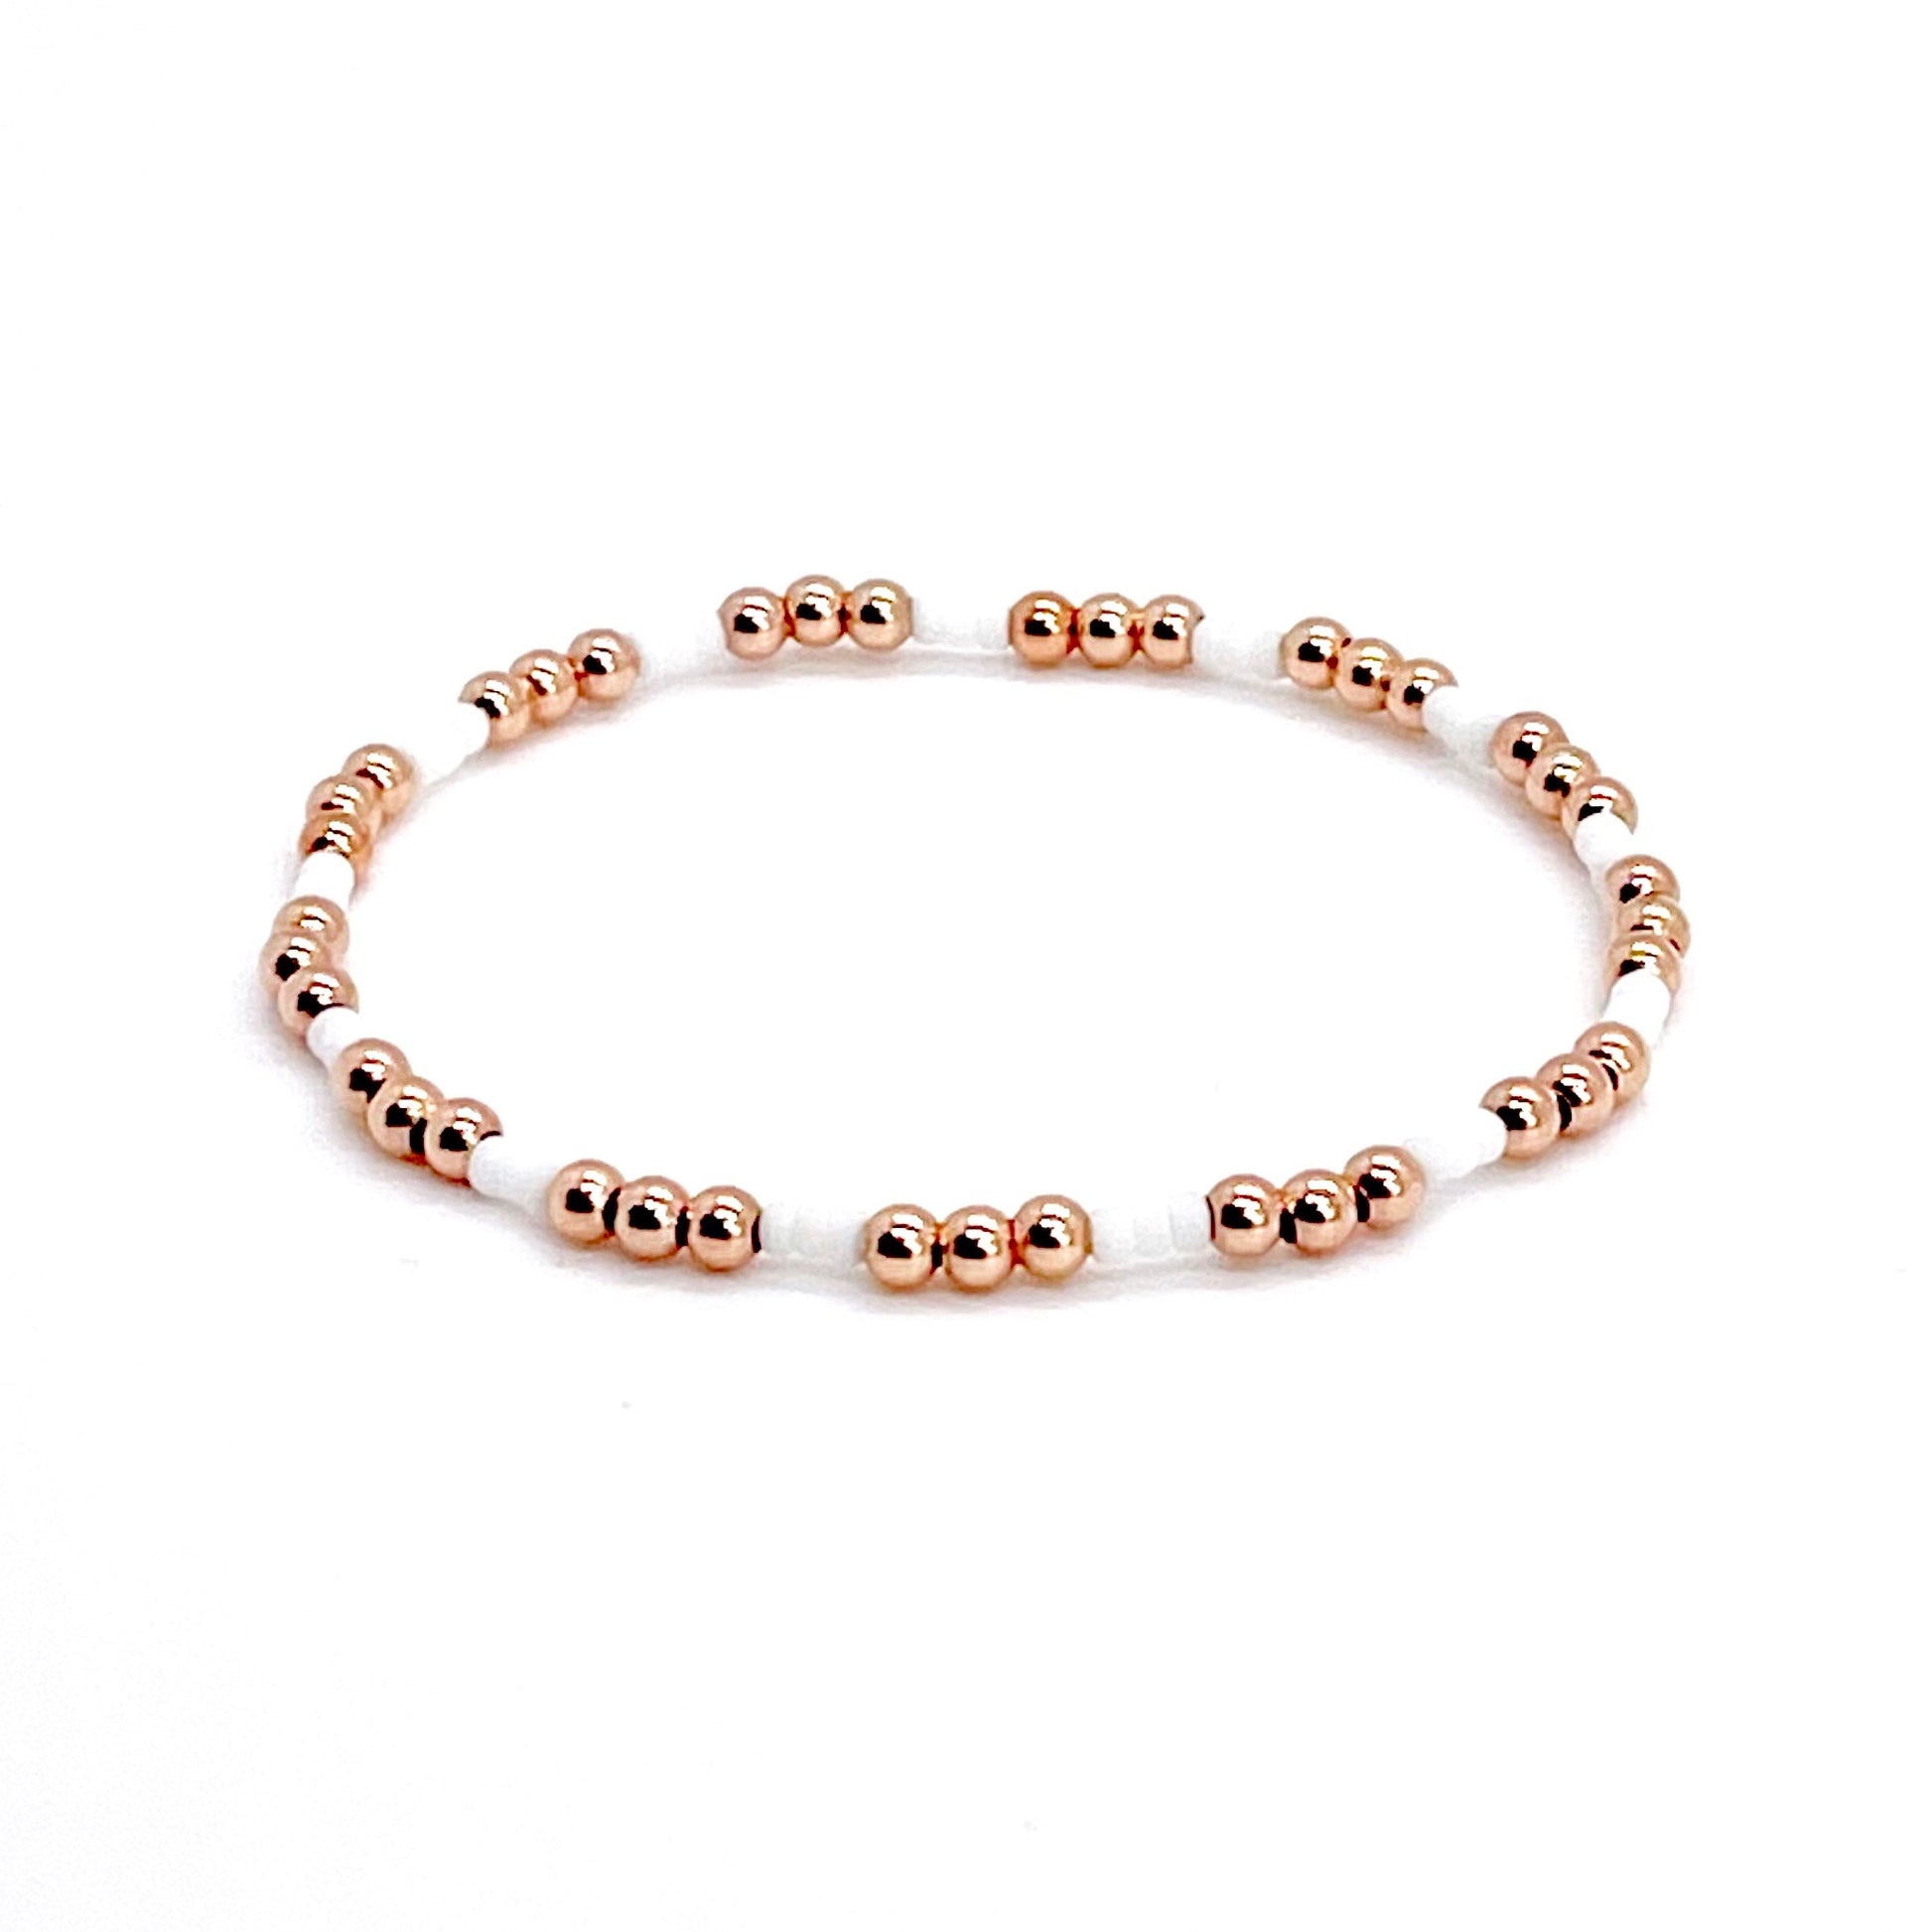 White bead bracelet with 3mm rose gold filled round beads on stretch cord.